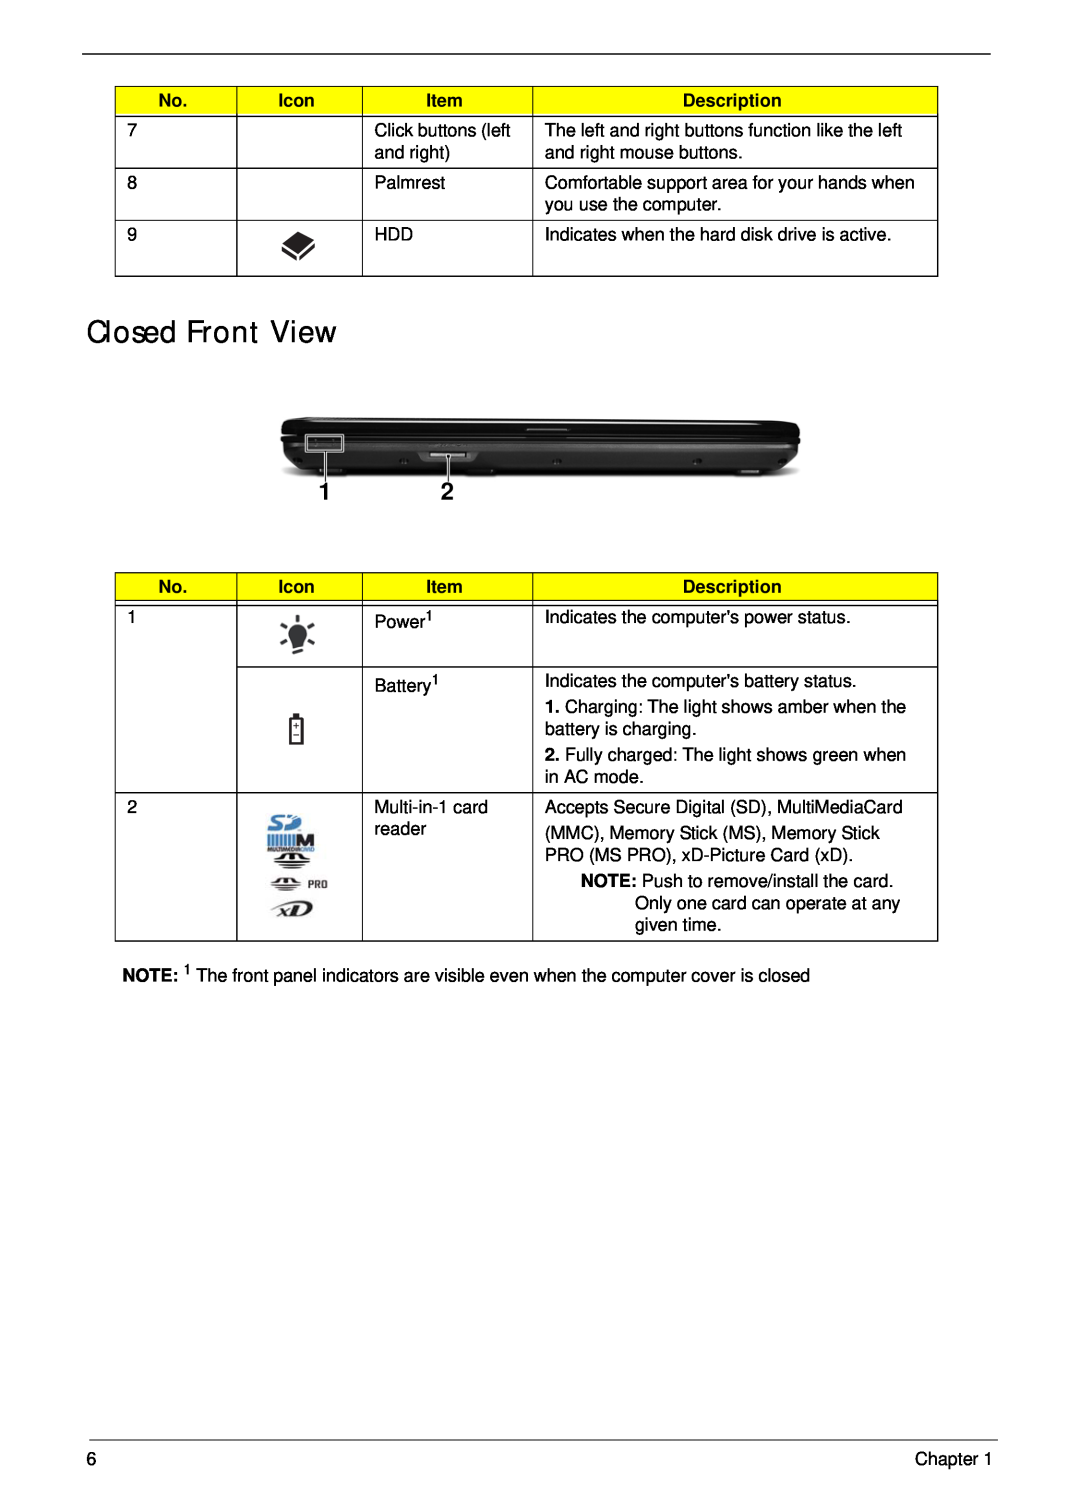 Acer 5532 manual Closed Front View, Icon, Description 